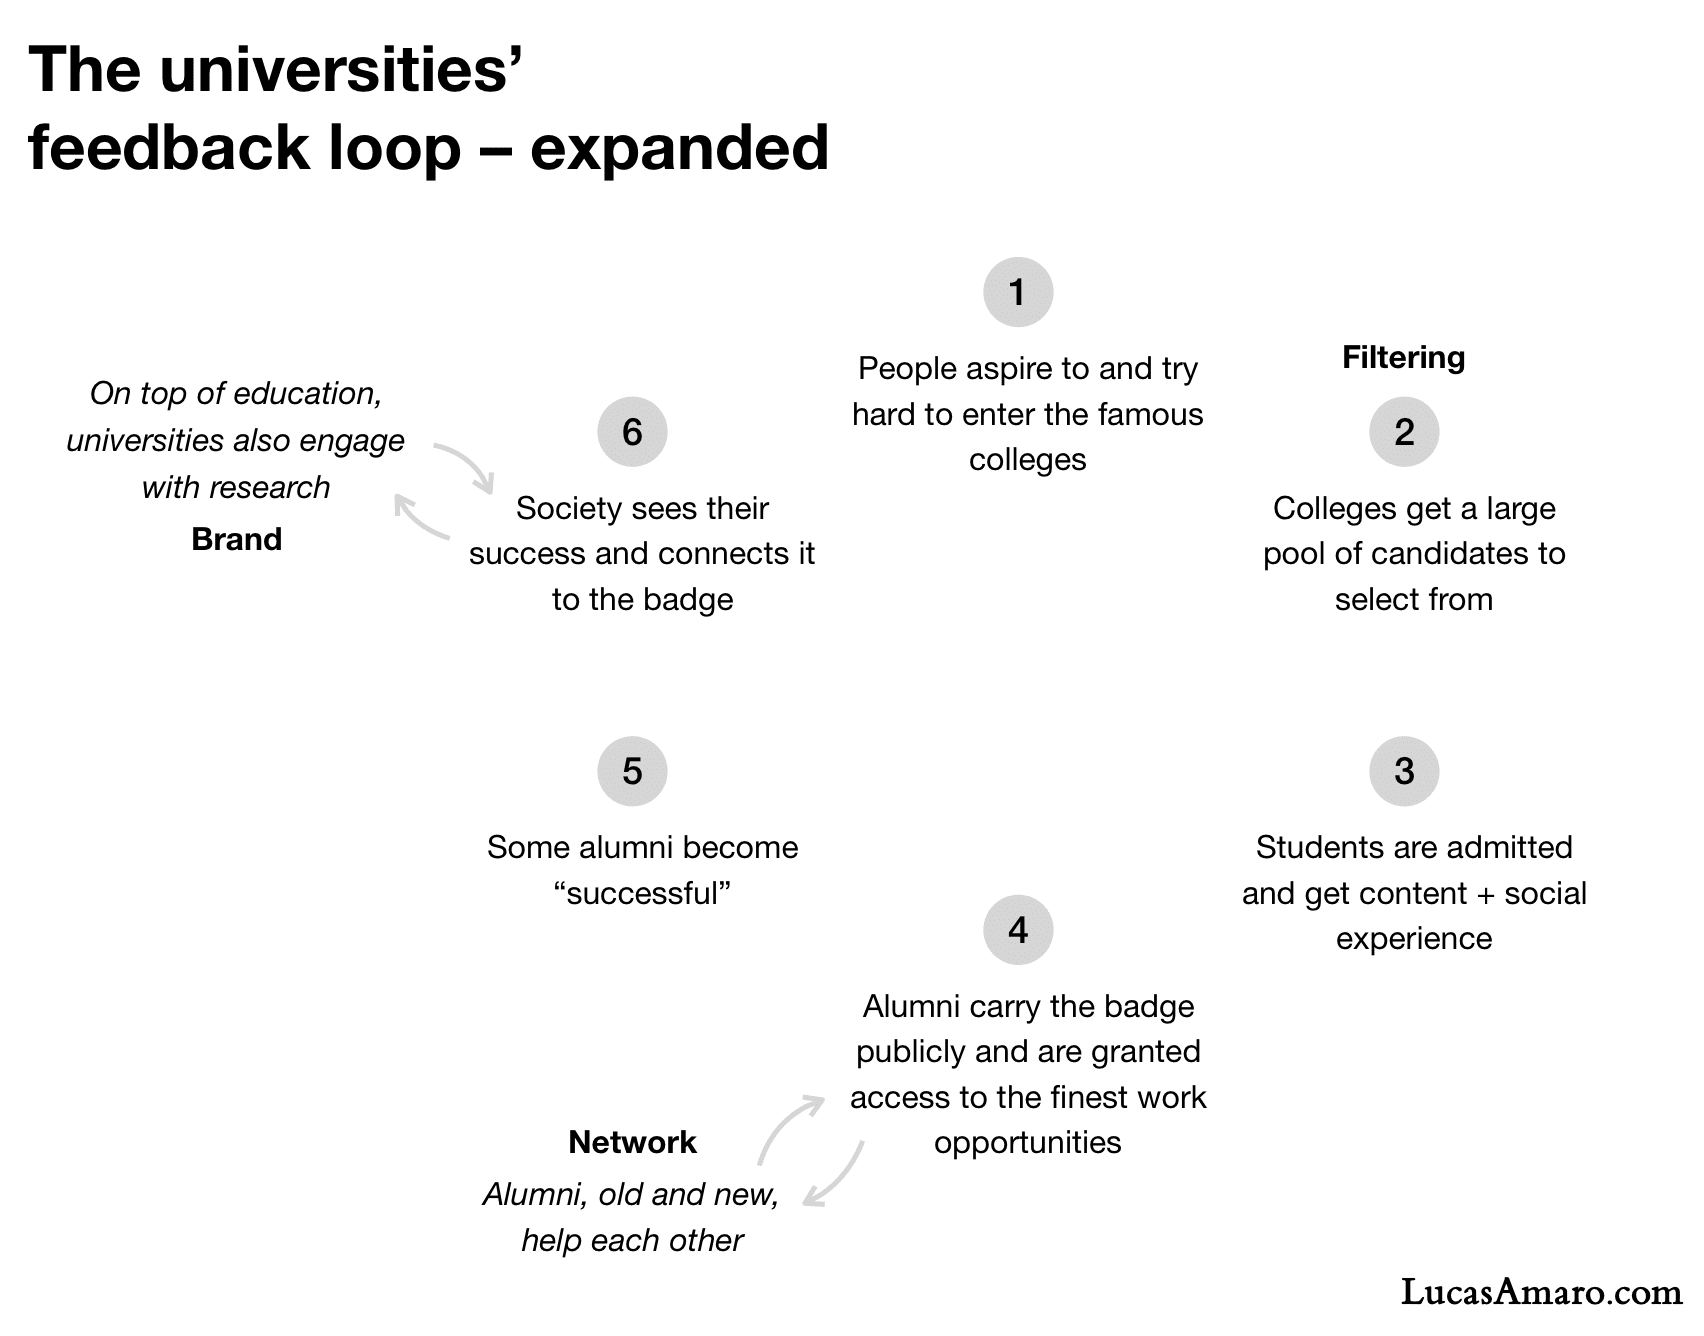 The three feedback loops behind the power of universities in society